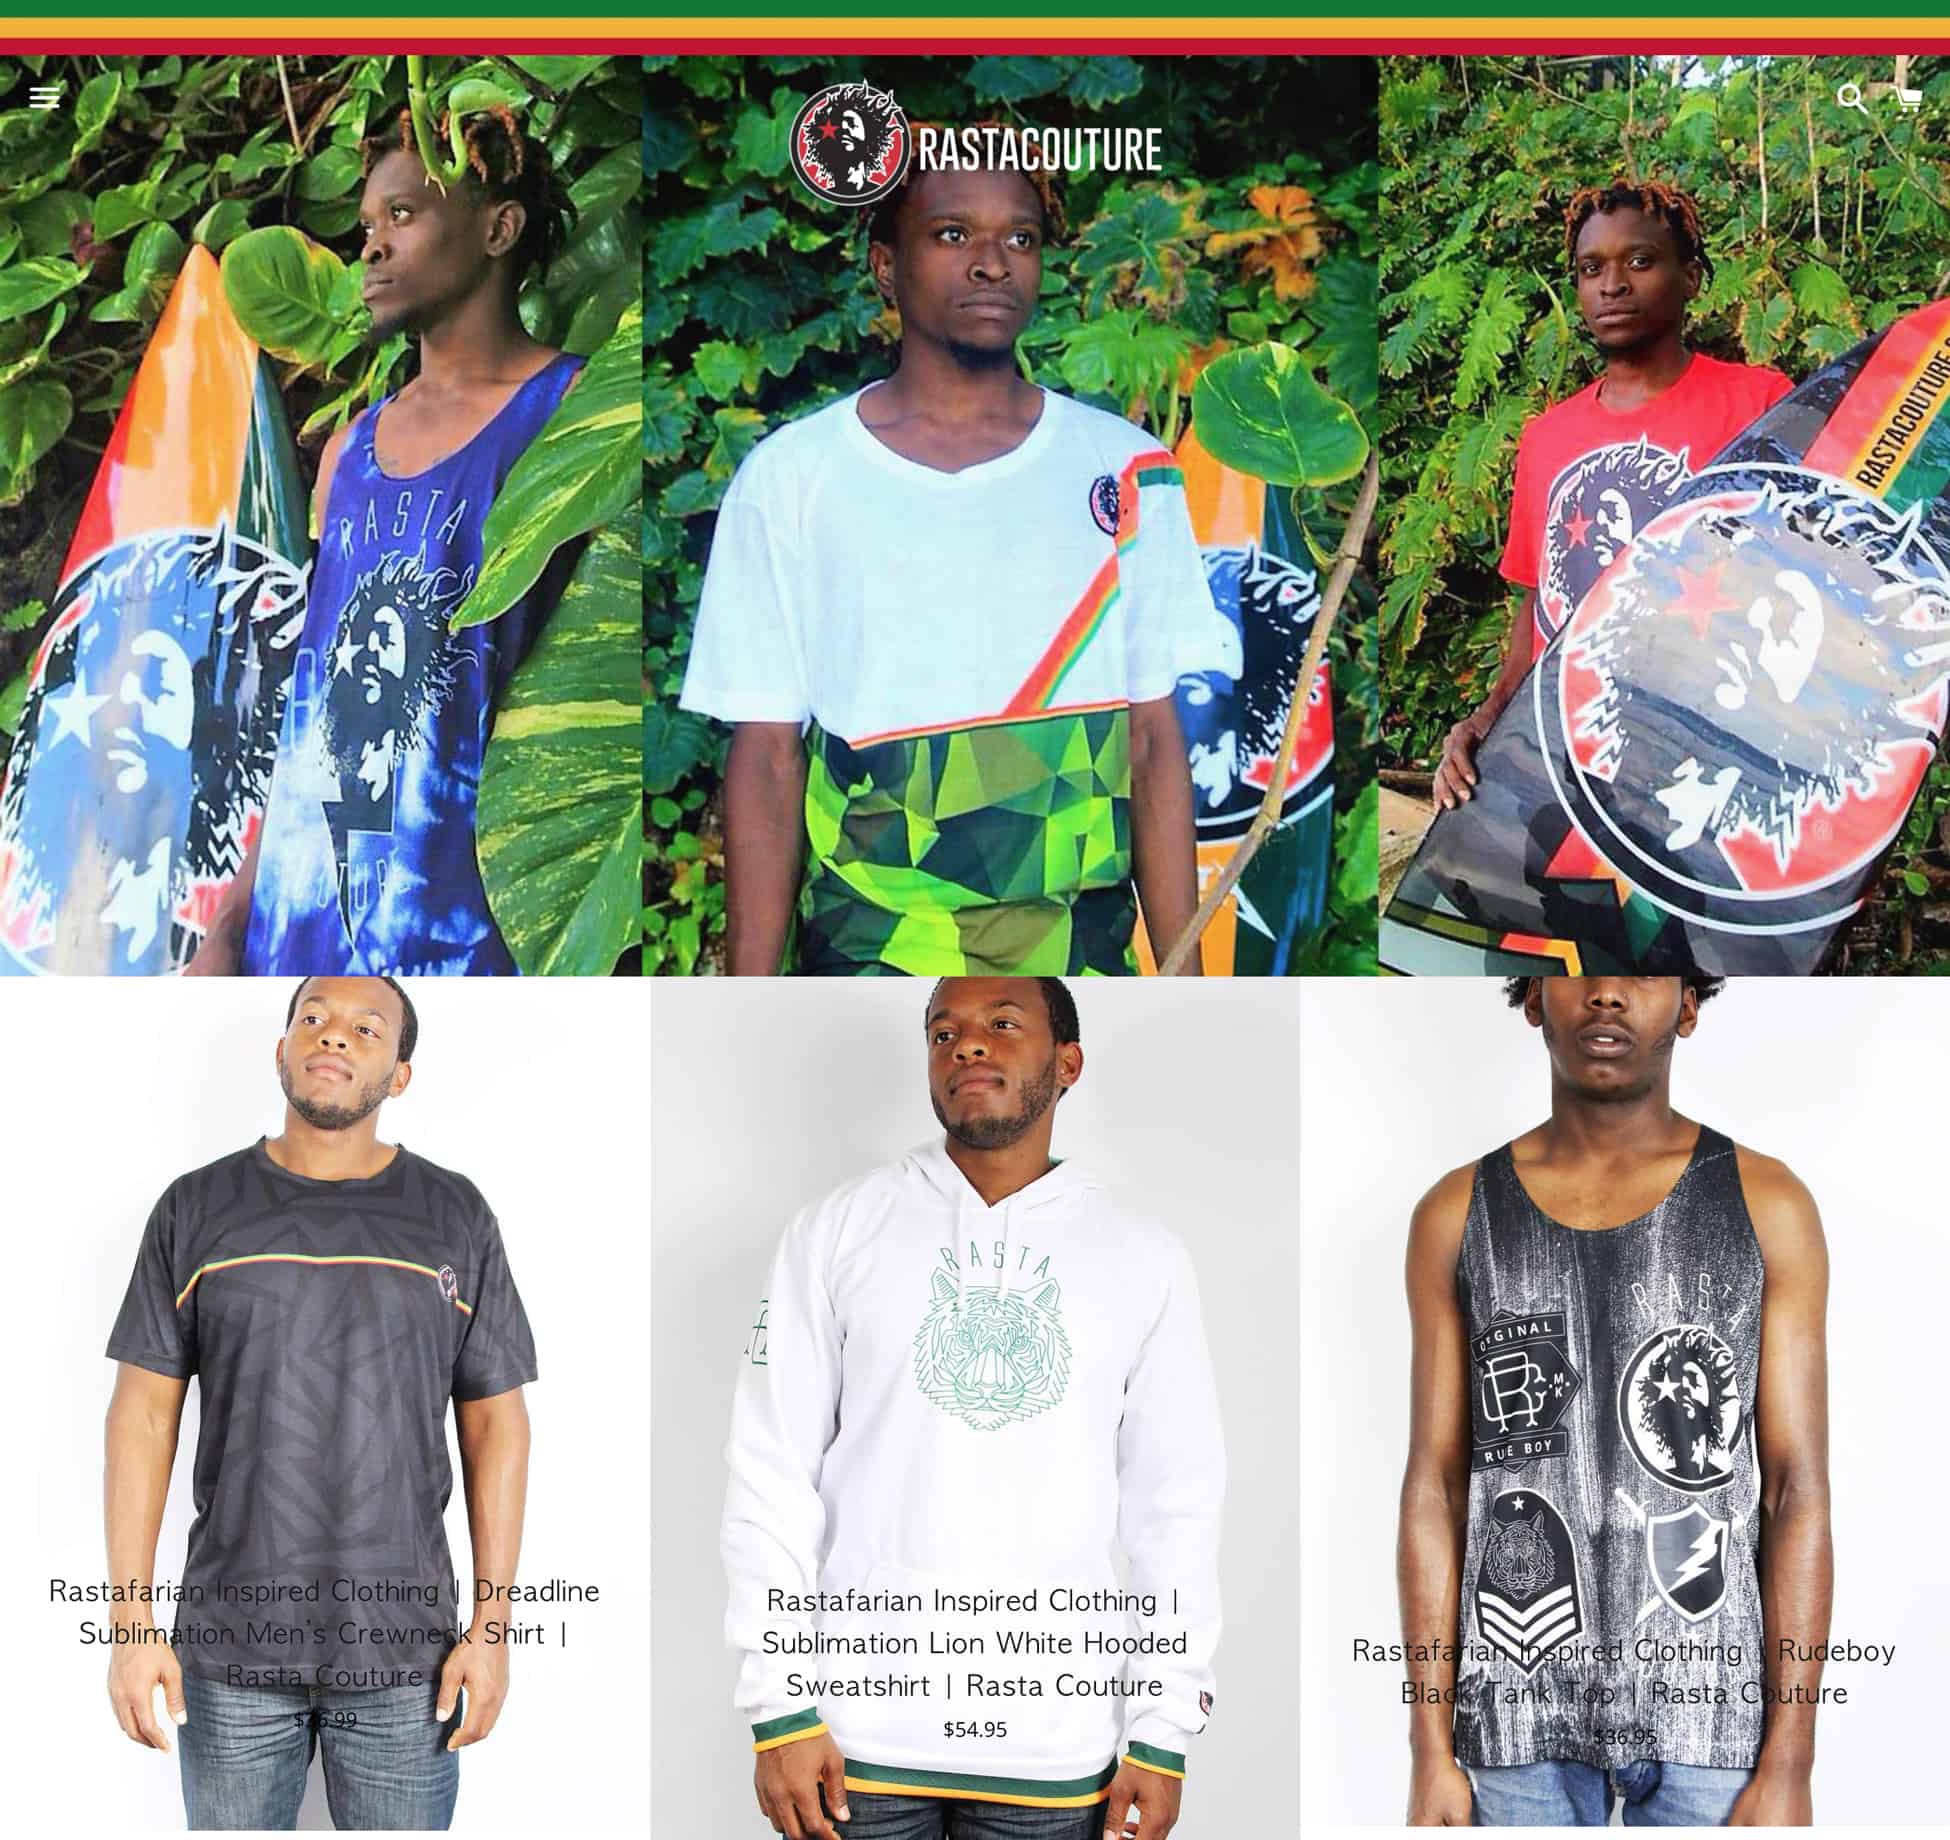 Rasta Couture Product Page